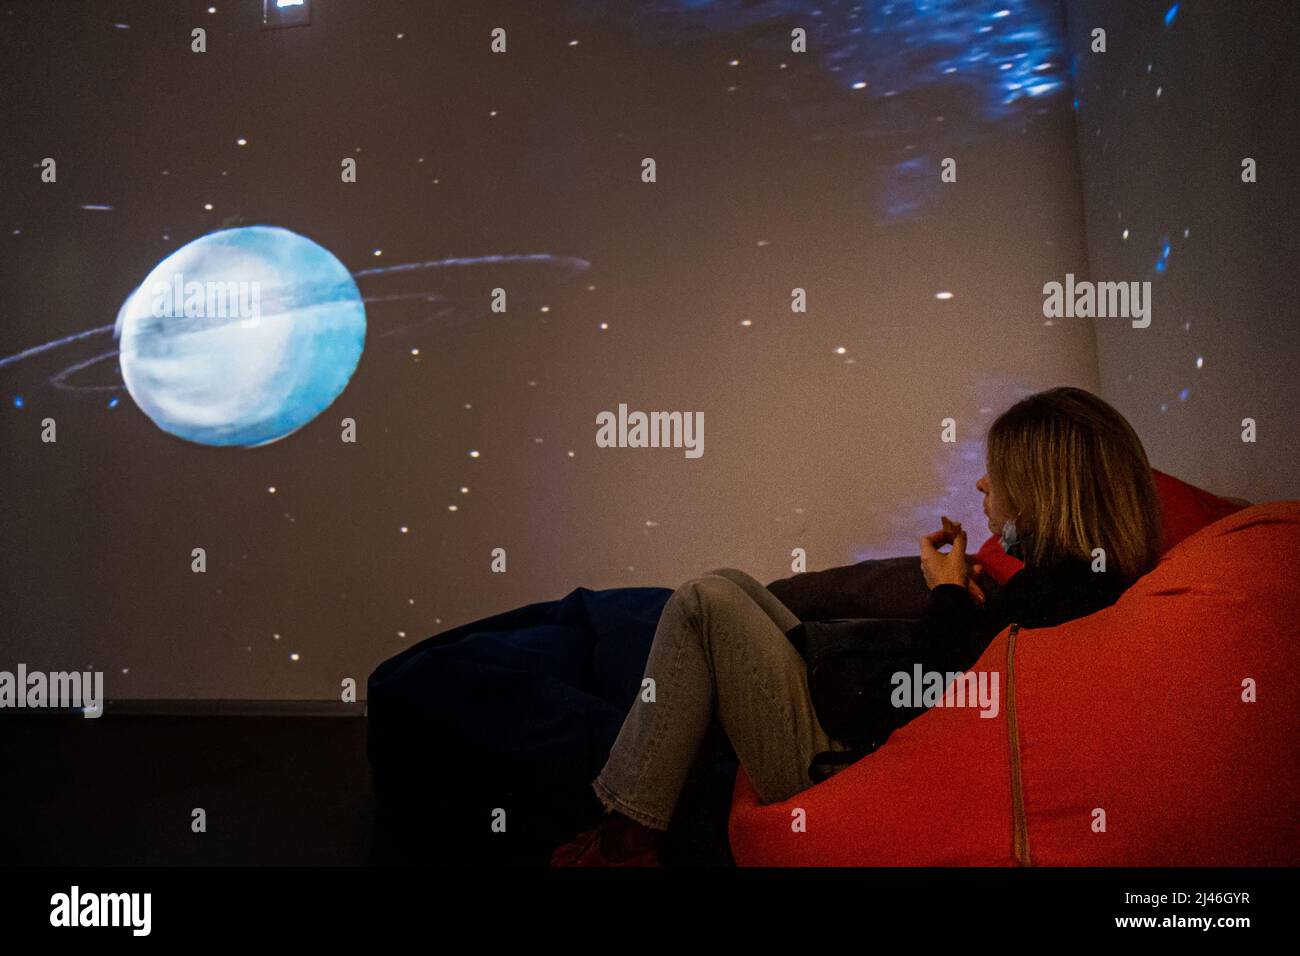 The girl faces the projection of the planet Saturn on the wall. Stock Photo